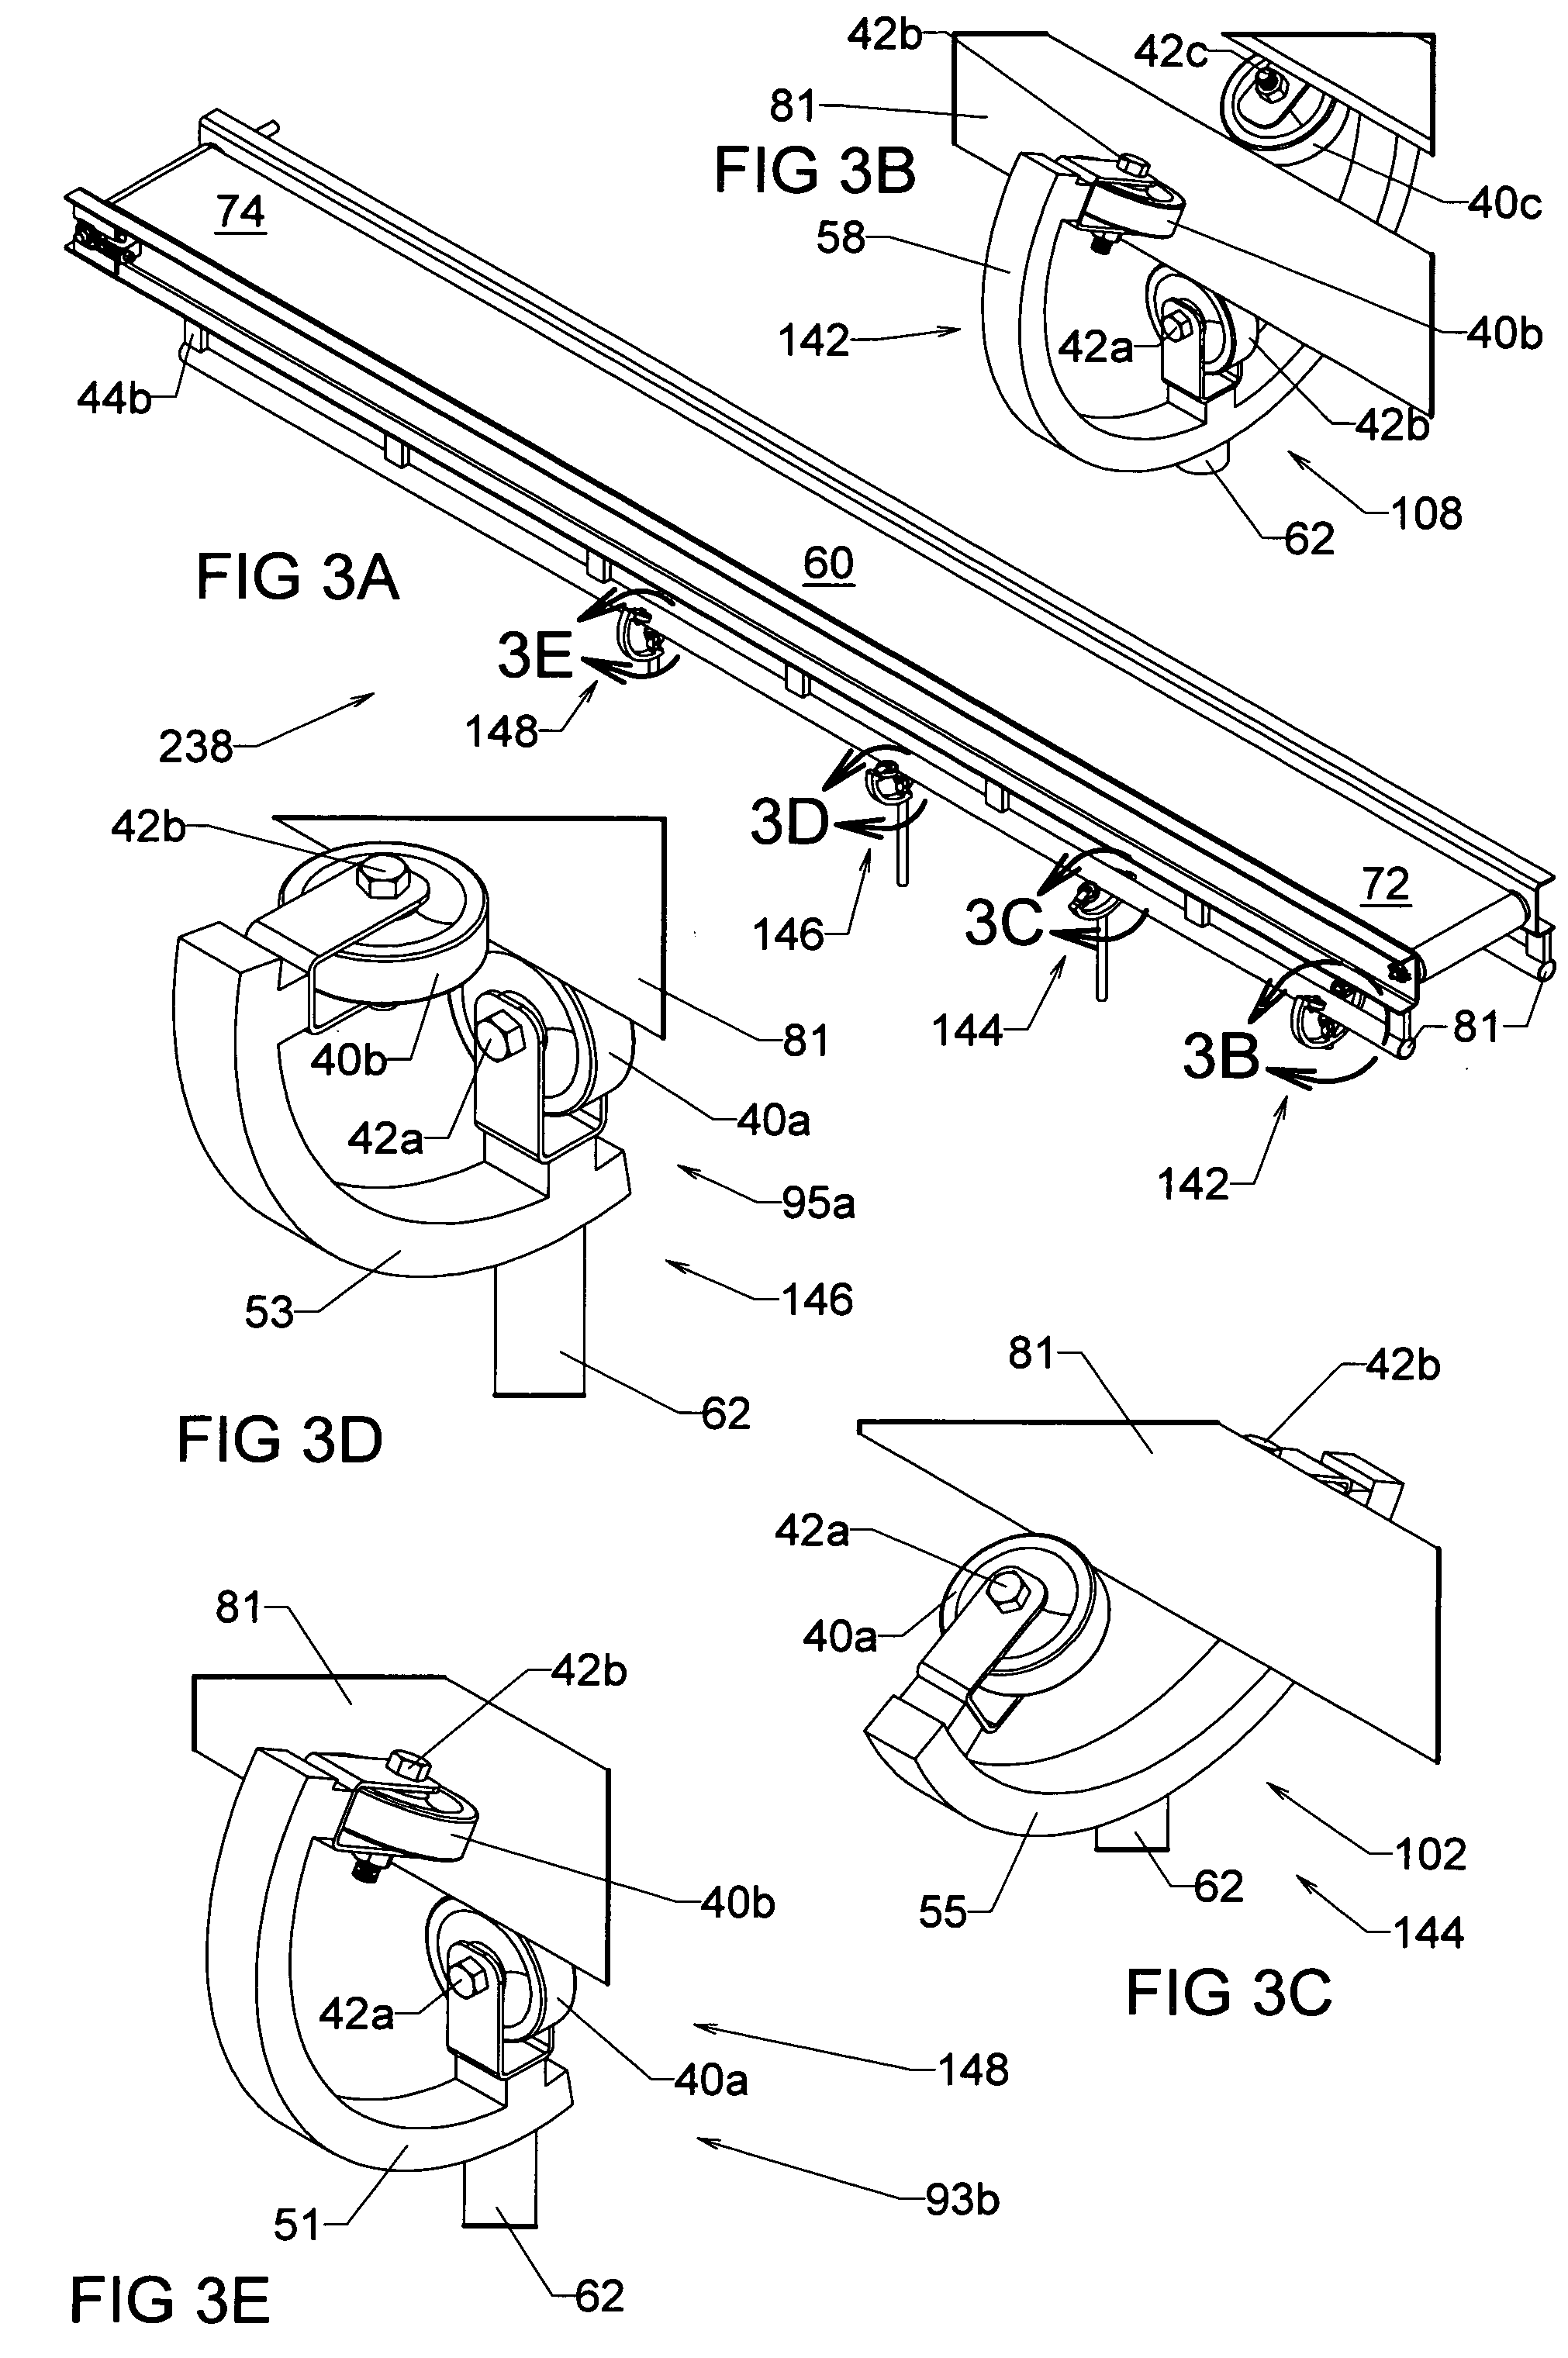 Arcuate guide apparatus and method for conveyor(s)